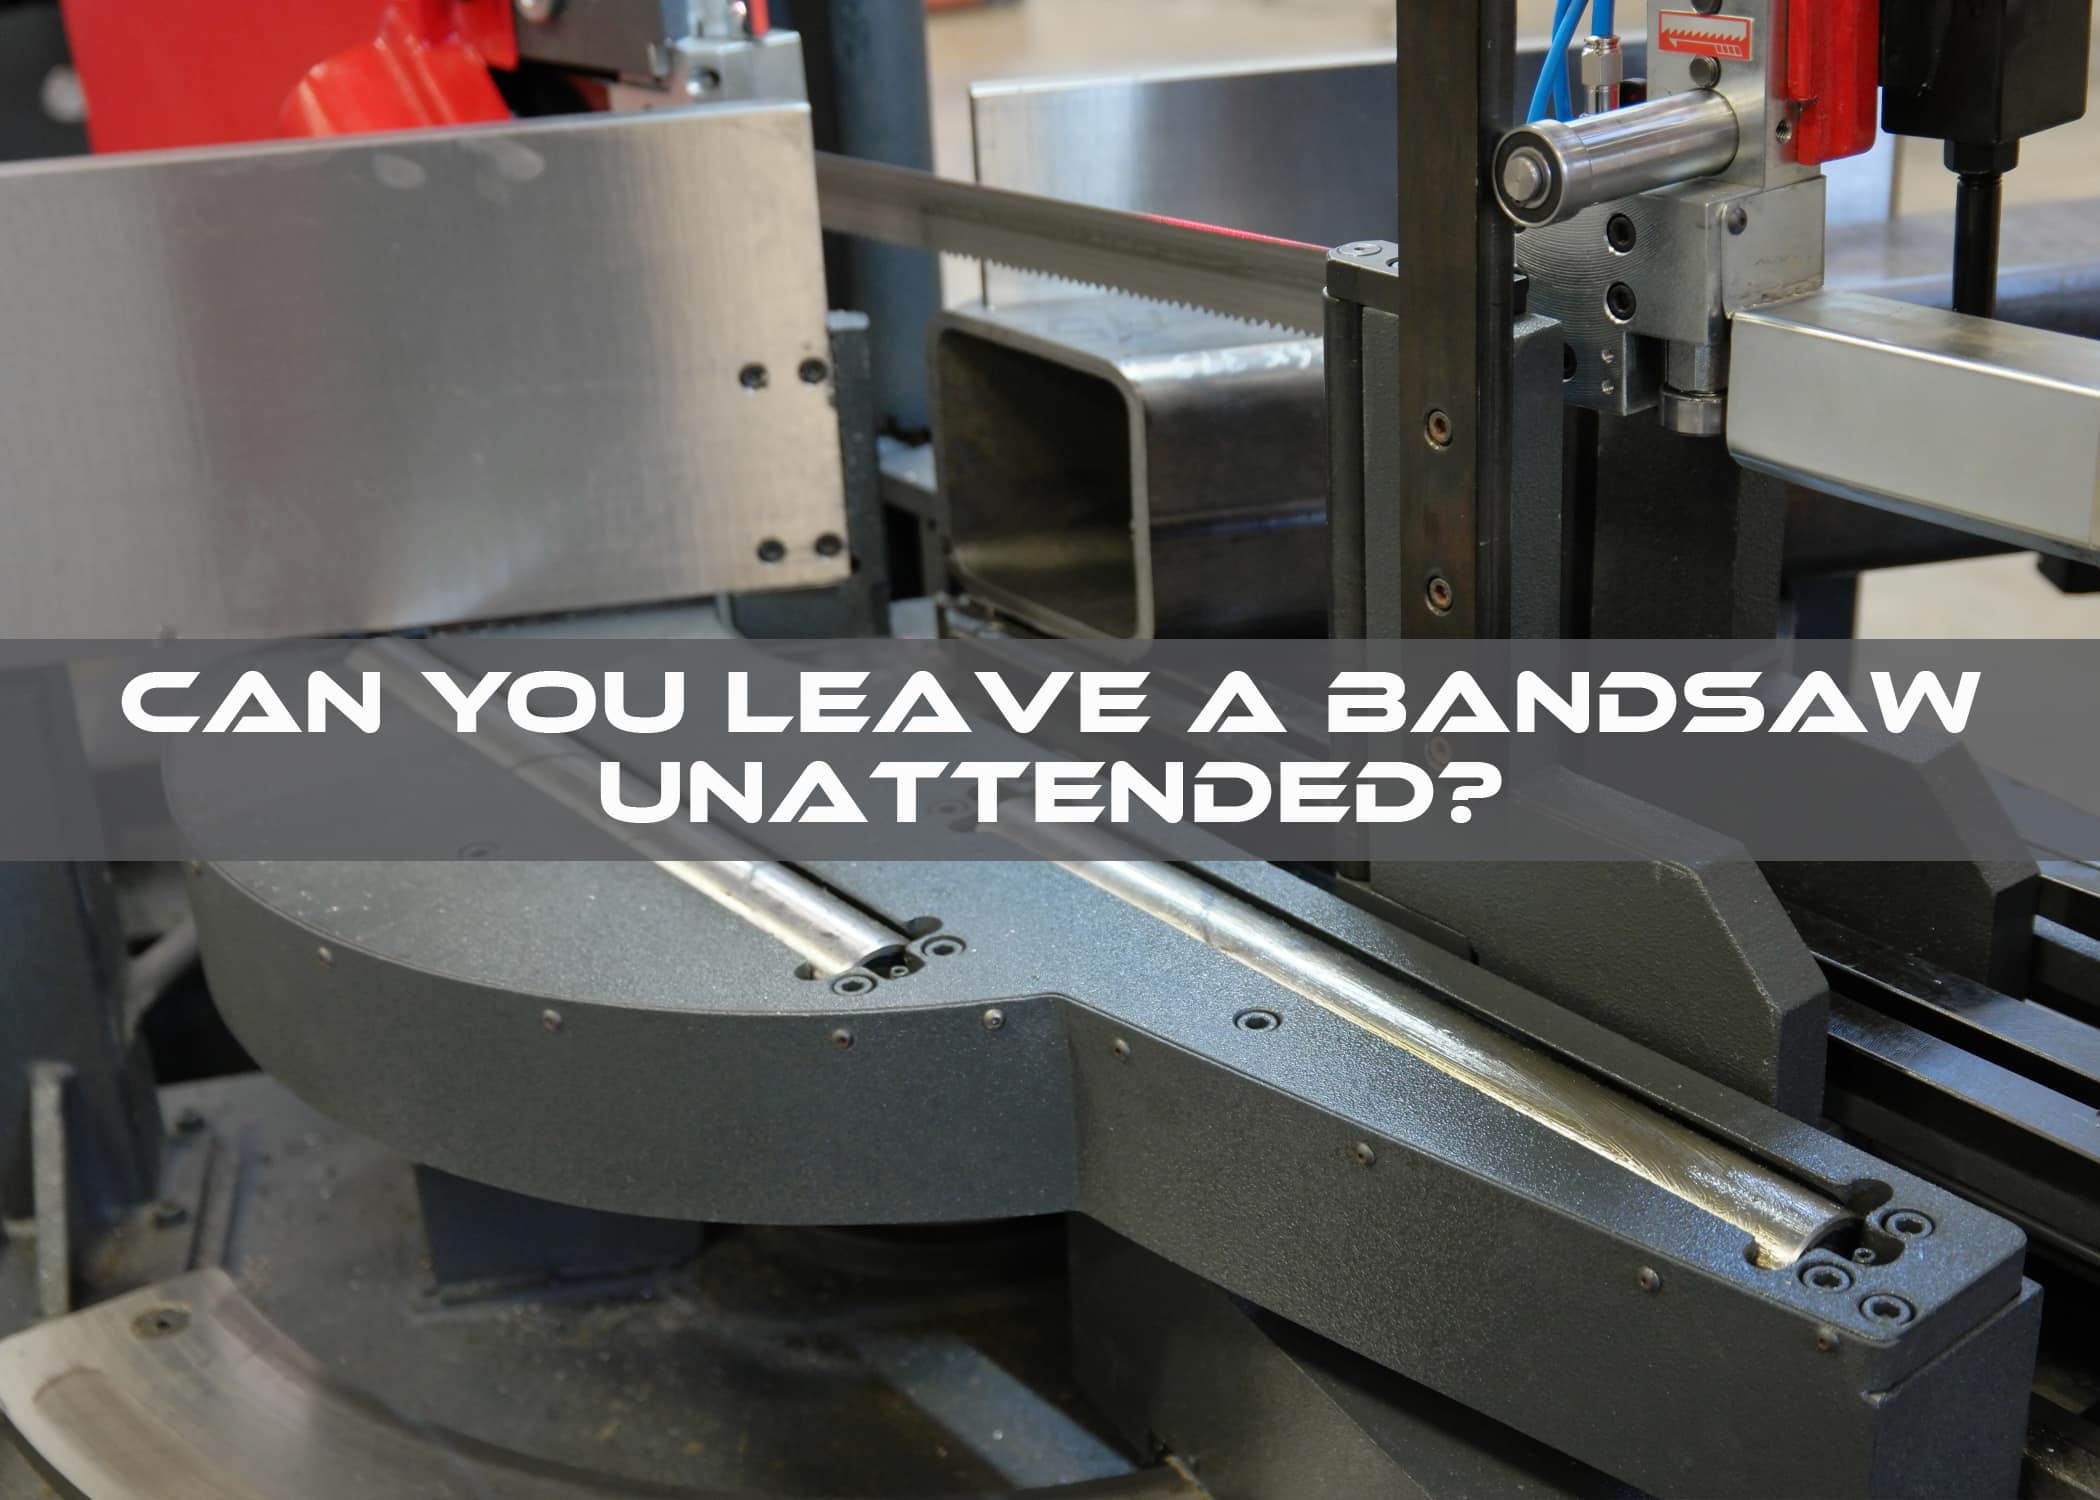 Can You Leave A Bandsaw Unattended?